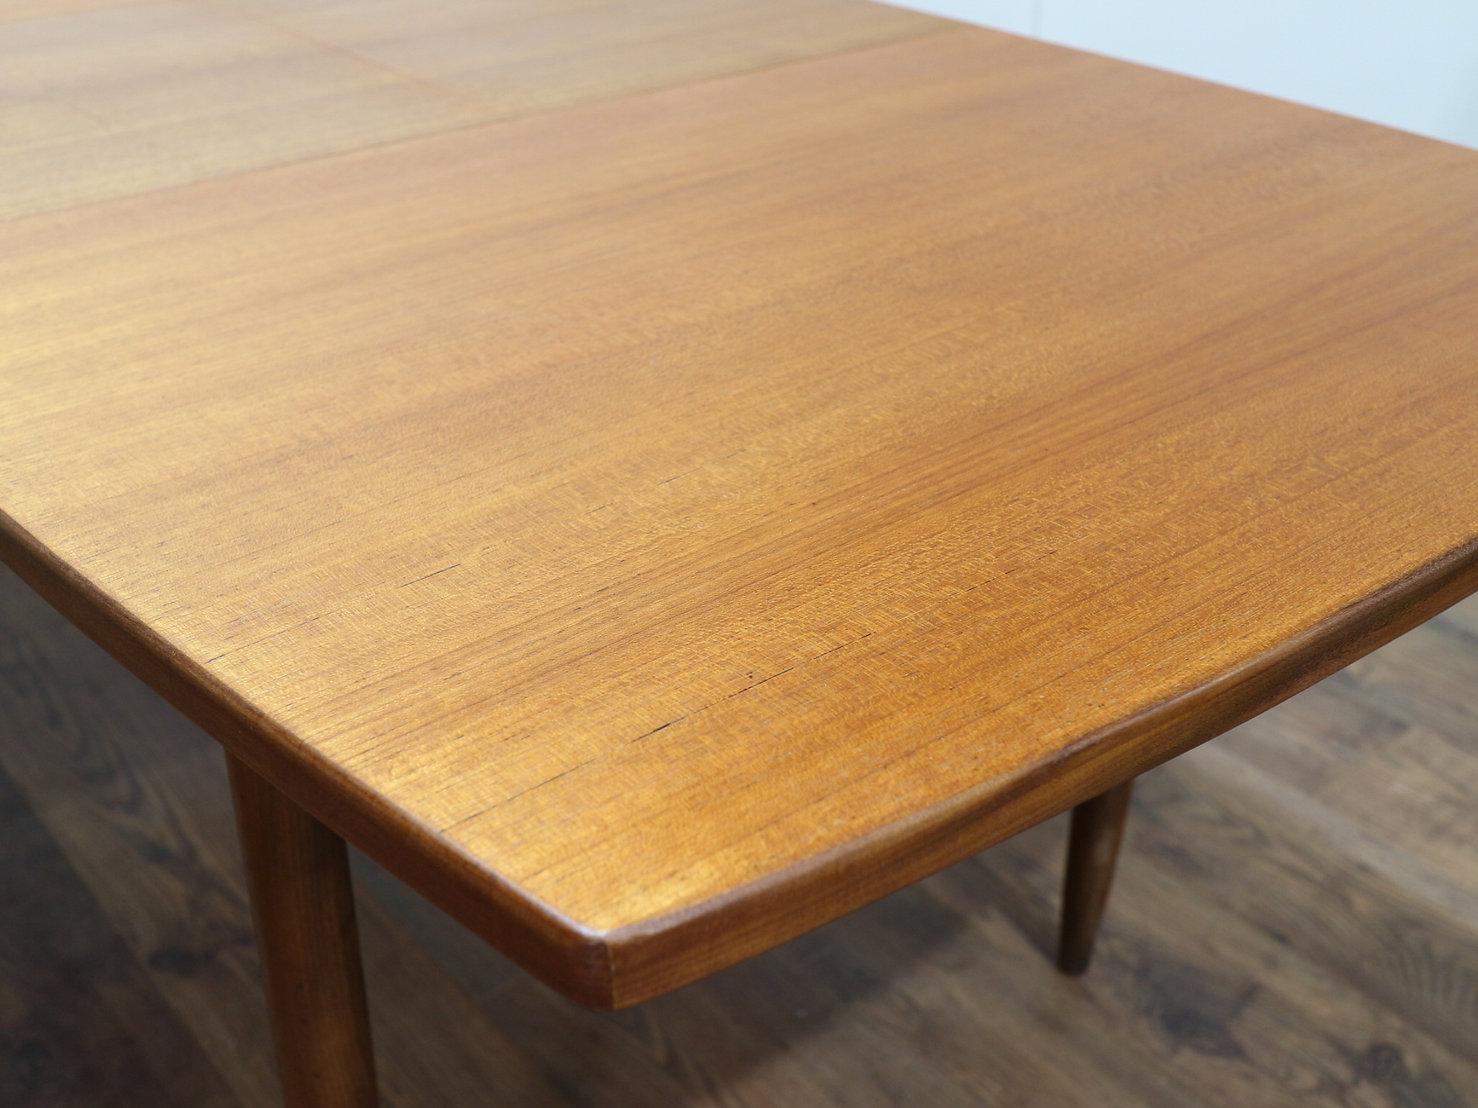 20th Century Mid-Century Modern Vintage Teak Extending Dining Table by William Lawrence